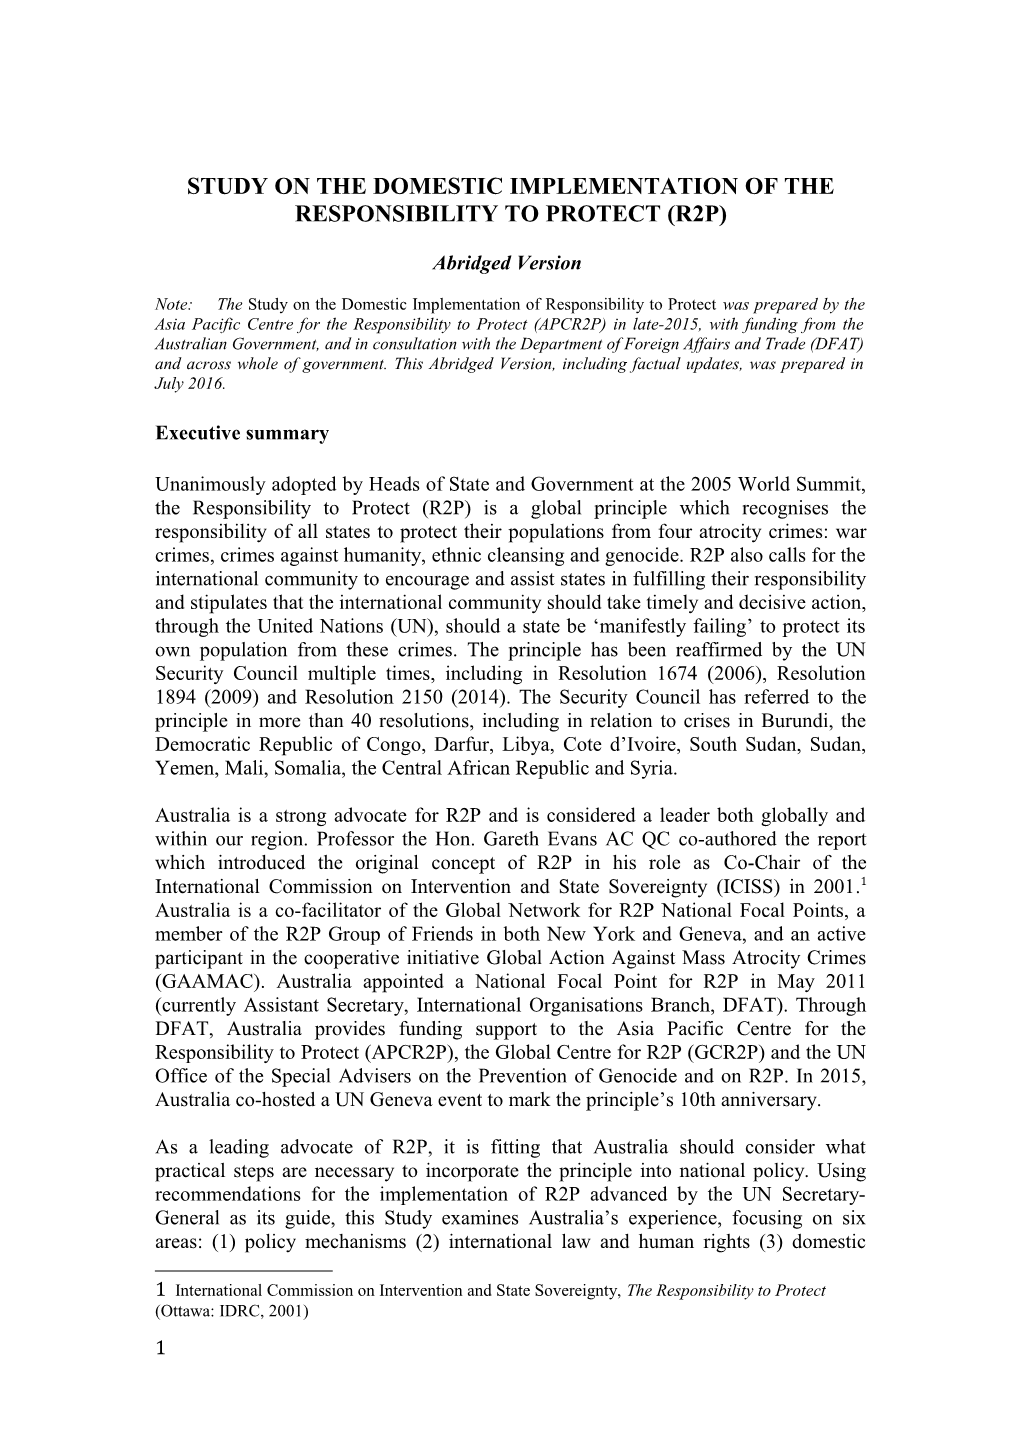 Study on the Domestic Implementation of the Responsibility to Protect (R2p)